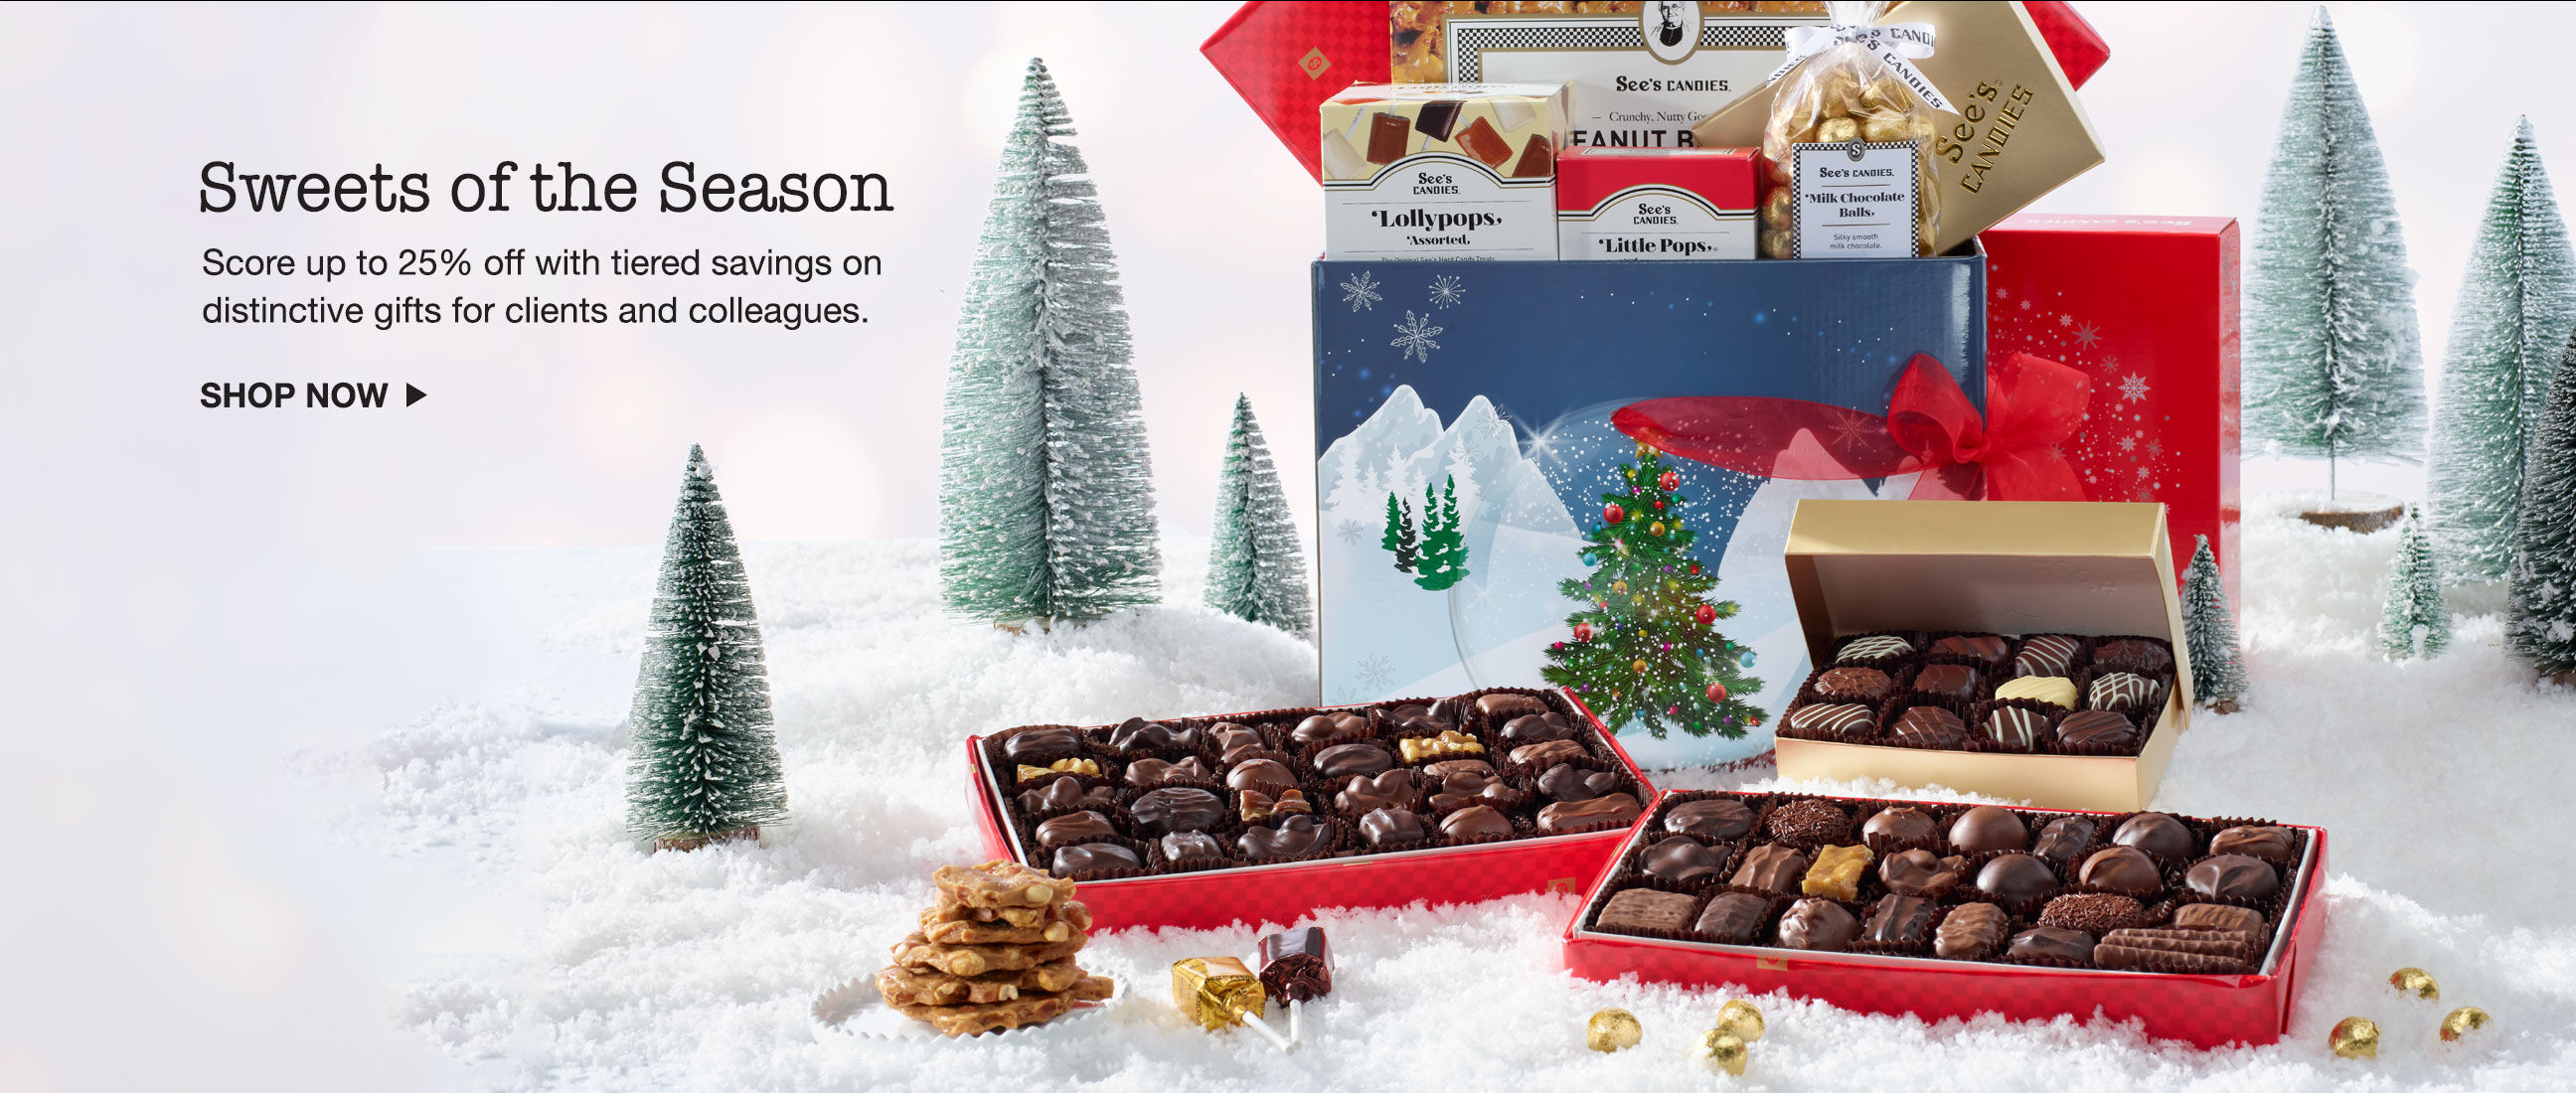 Corporate Gifting Chocolates and Candies for Winter Gifting